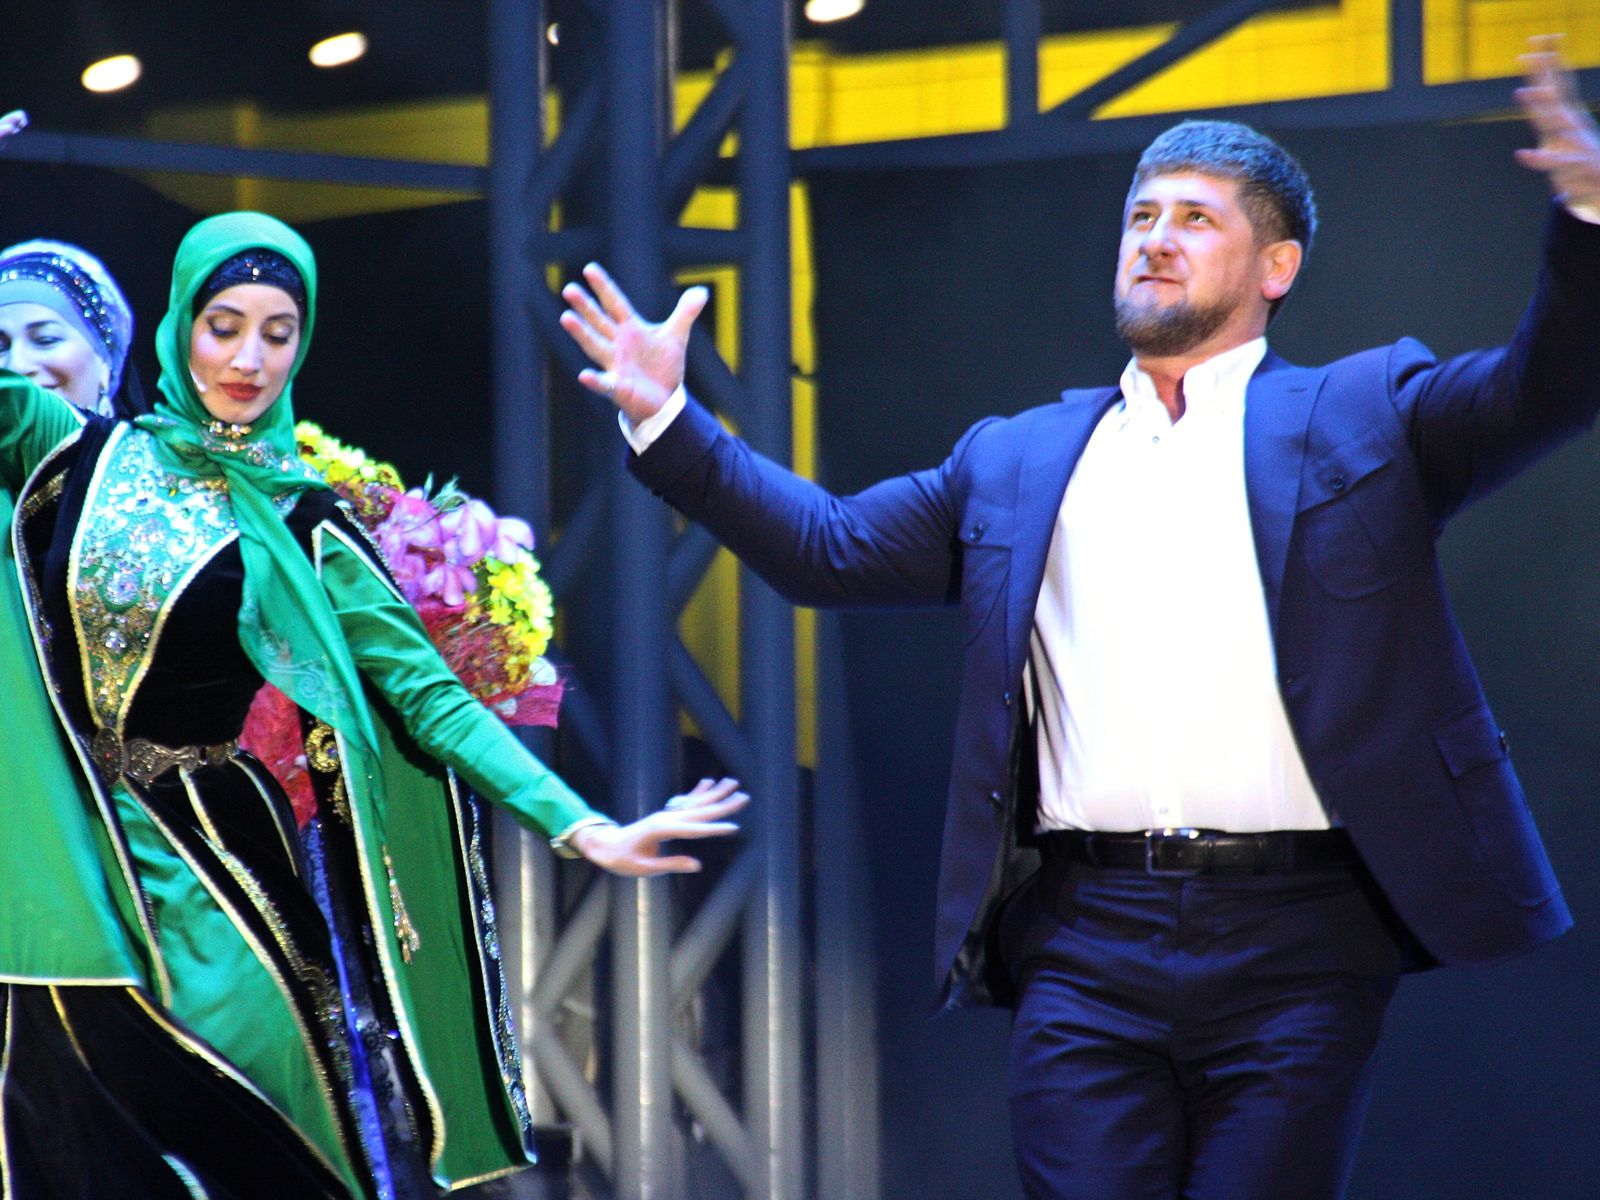 Chechnya Bans Music That Isn't Between 80 and 116 Beats Per Minute